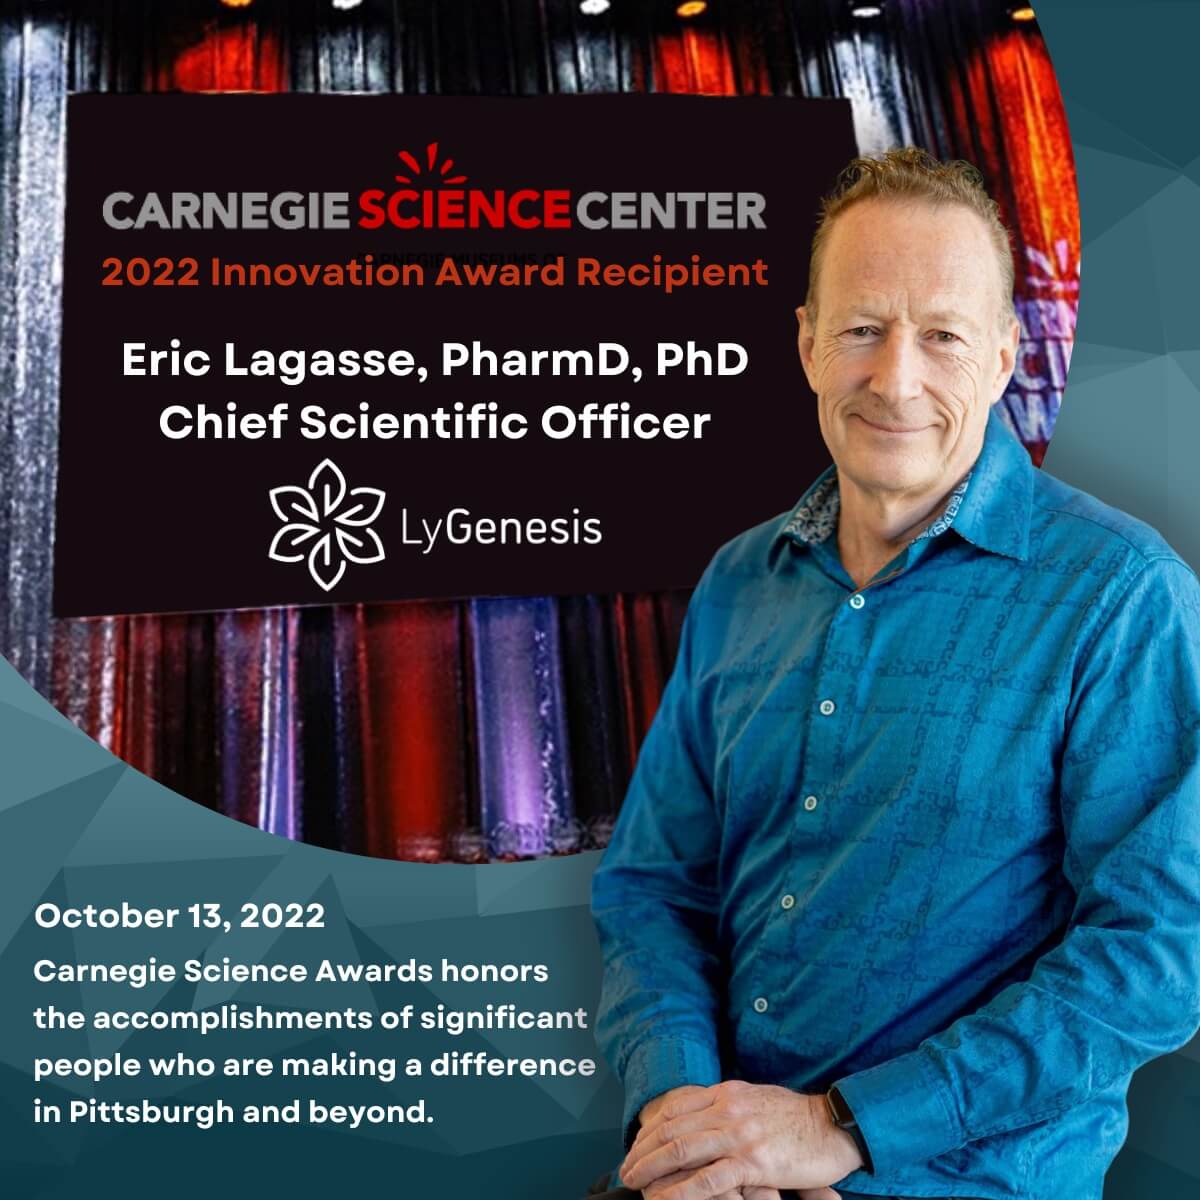 Eric Lagasse, PharmD, PhD, is the Carnegie Science Center 2022 Innovation Award Recipient 